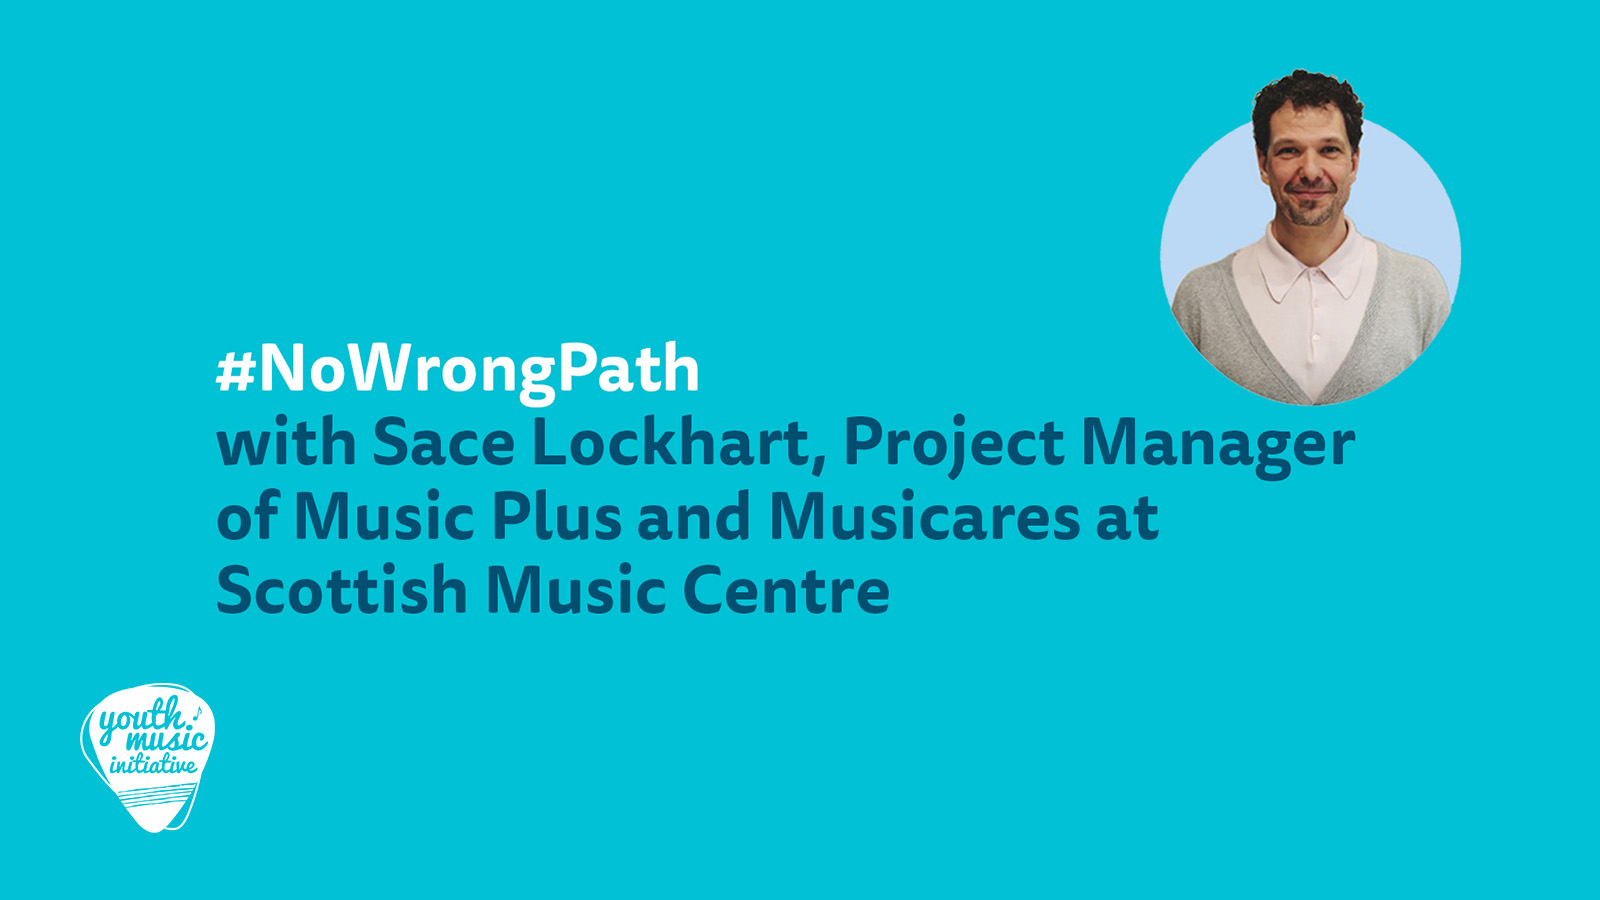 #NoWrongPath with Sace Lockhart, ProjectManager of Music Plus and Musicares at Scottish Music Centre on a blue background with the YMI 20th anniversary logo, an image of Sace who is a man with light brown hair smiling in a gentle, friendly way, wearing a shirt and a grey jumper